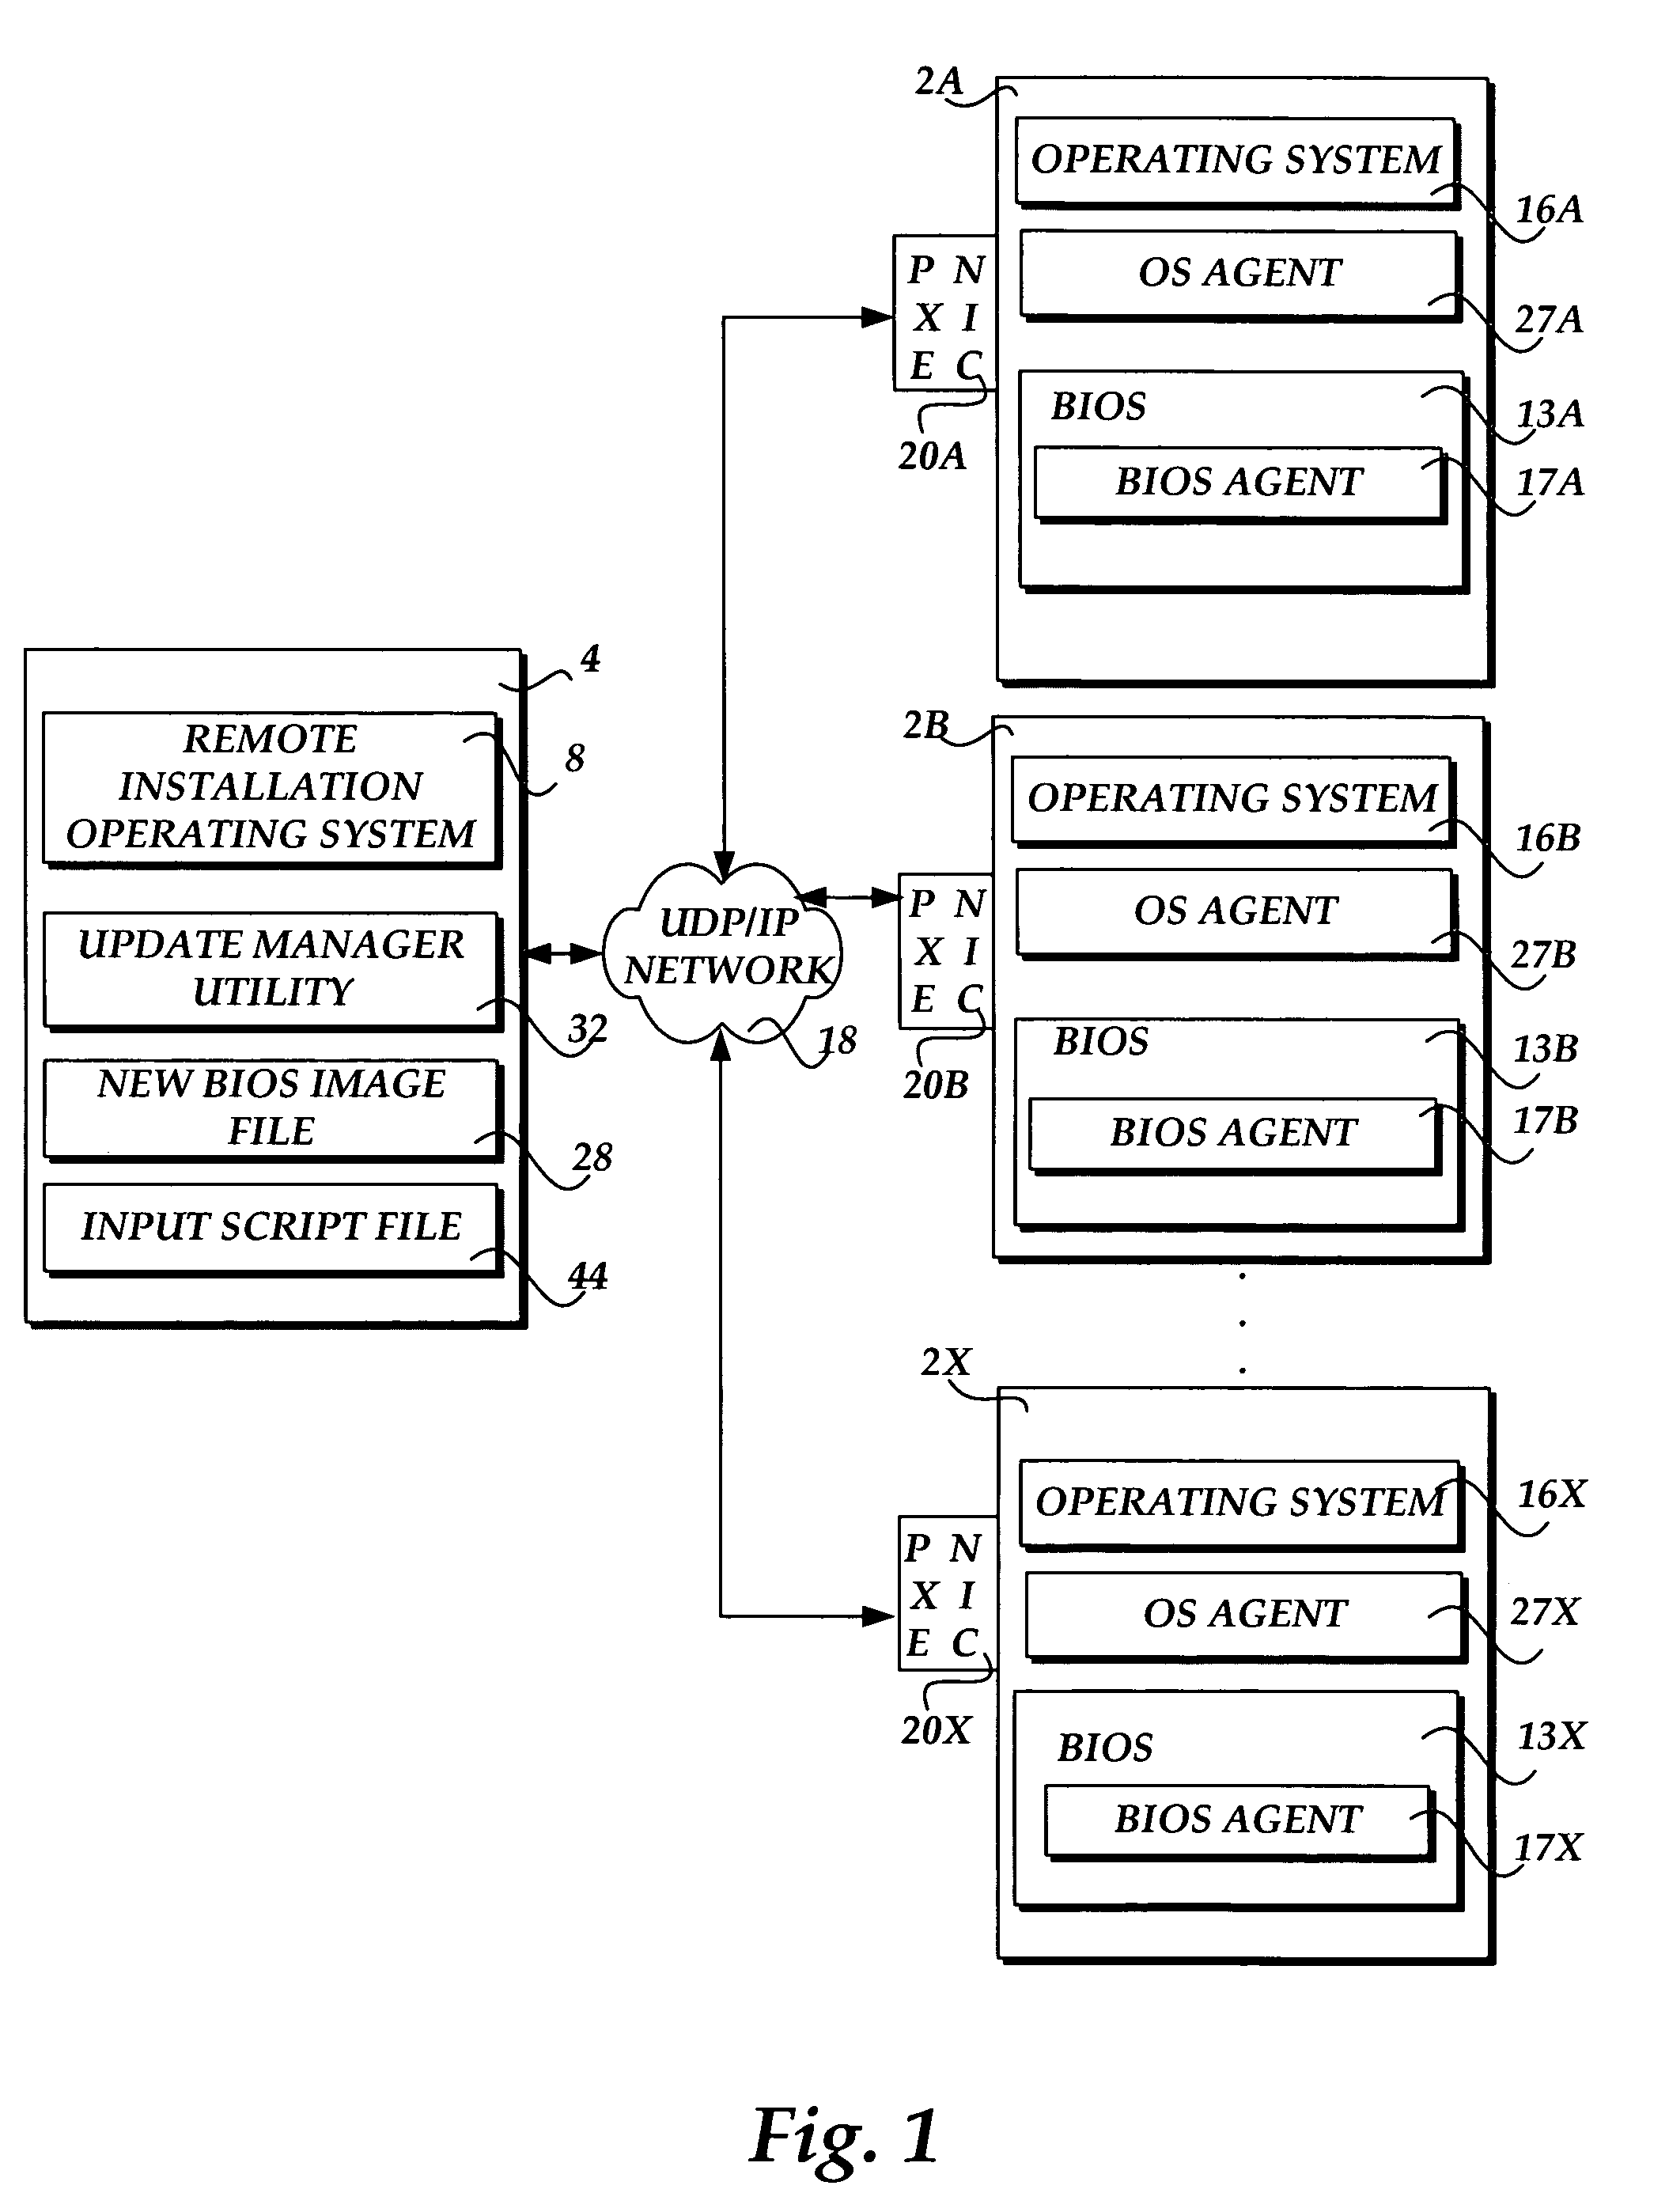 Methods and systems for updating the firmware on a plurality of network-attached computing devices